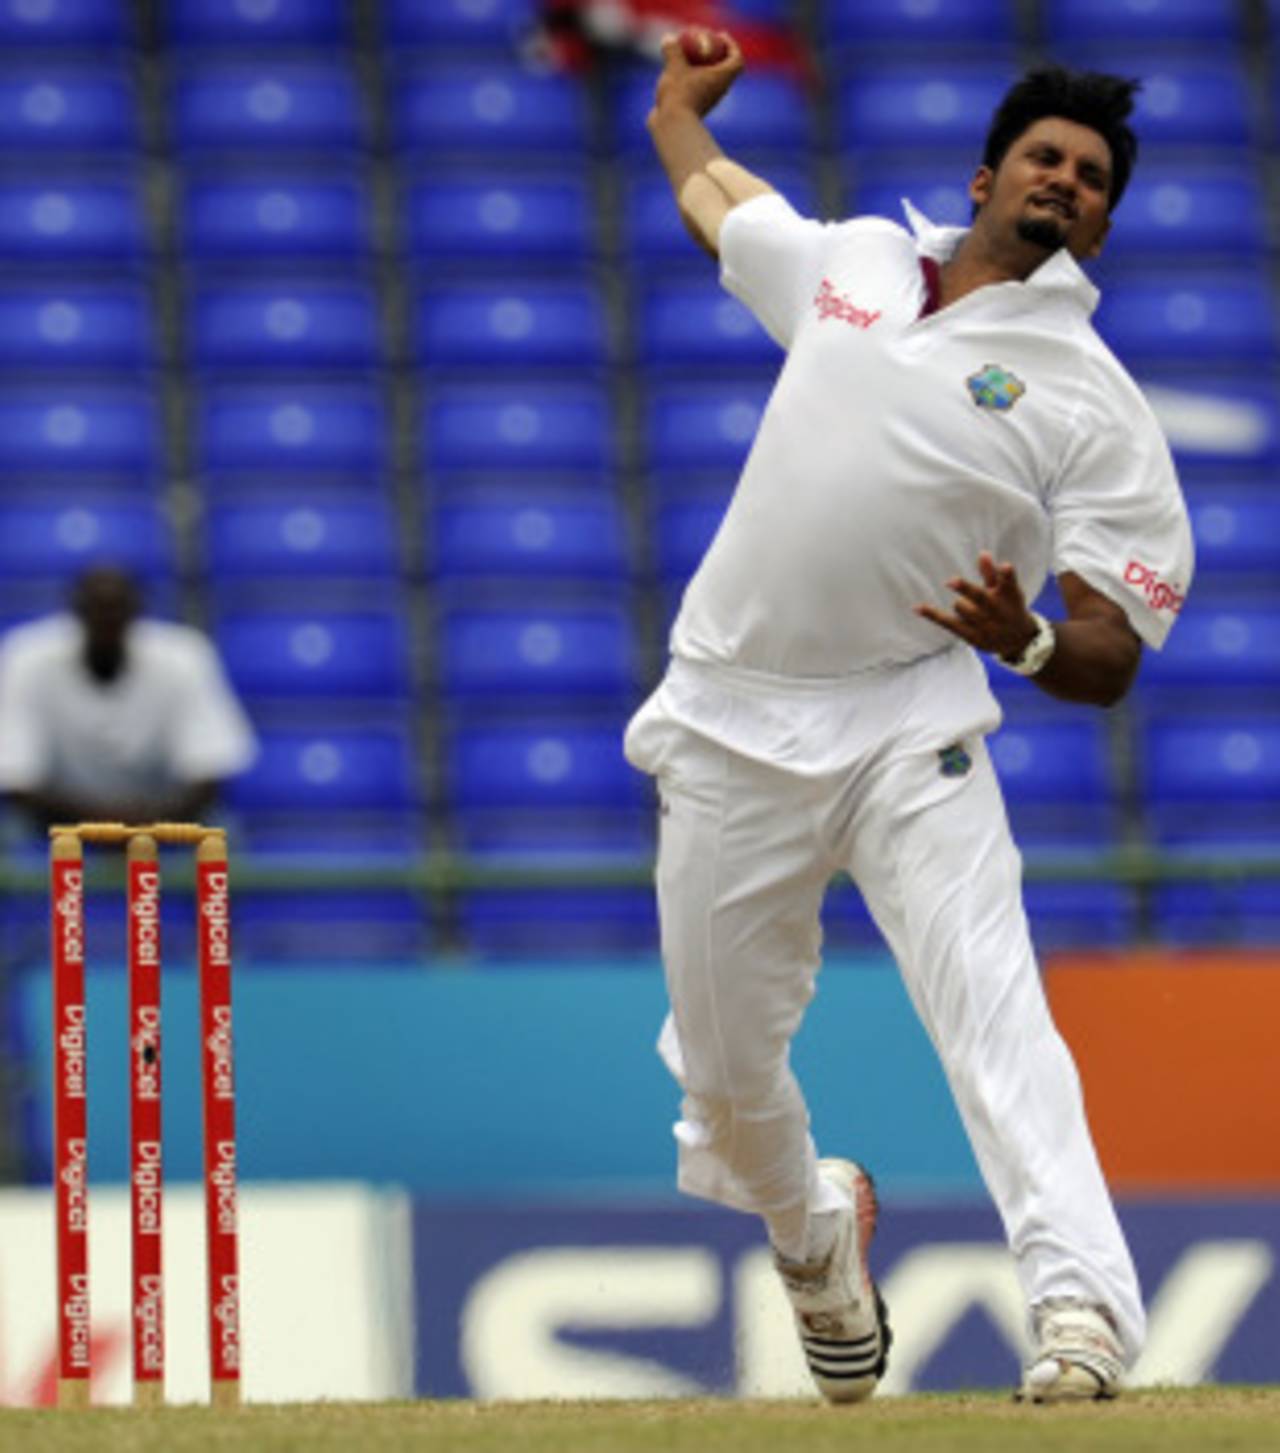 Ravi Rampaul bowled a purposeful spell with the new ball, West Indies v Pakistan, 2nd Test, 1st day, St Kitts, May 20, 2011